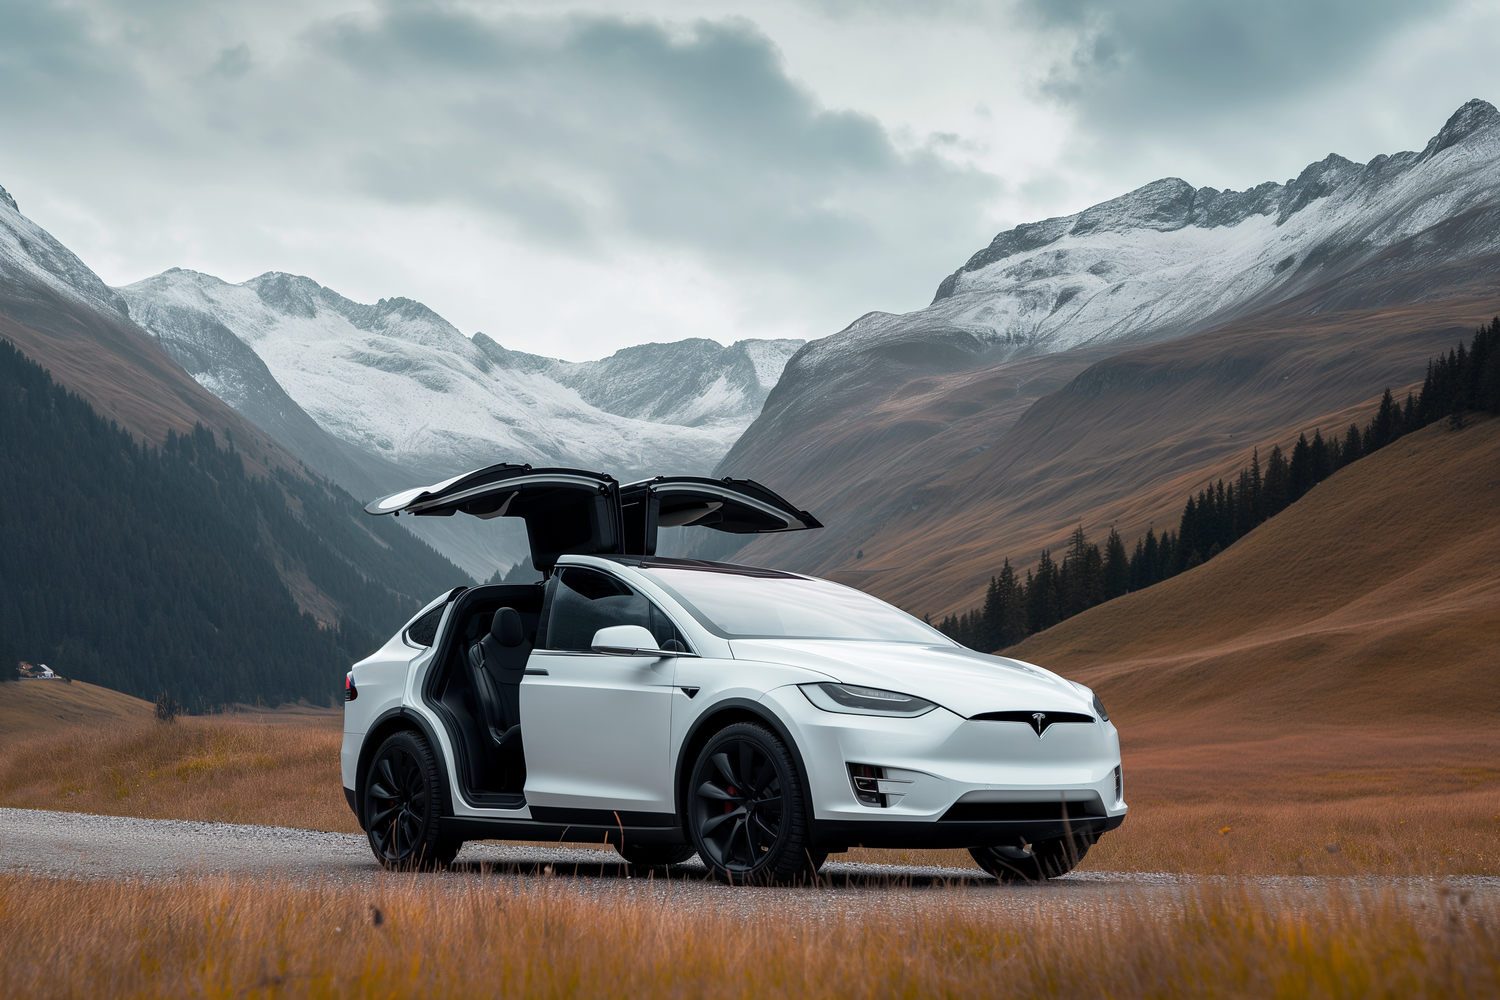 Our superior charging solutions turn stressful trips into effortless explorations. Whether navigating city streets or embarking on scenic adventures, Zeuspace guarantees your EV is prepared for any journey.